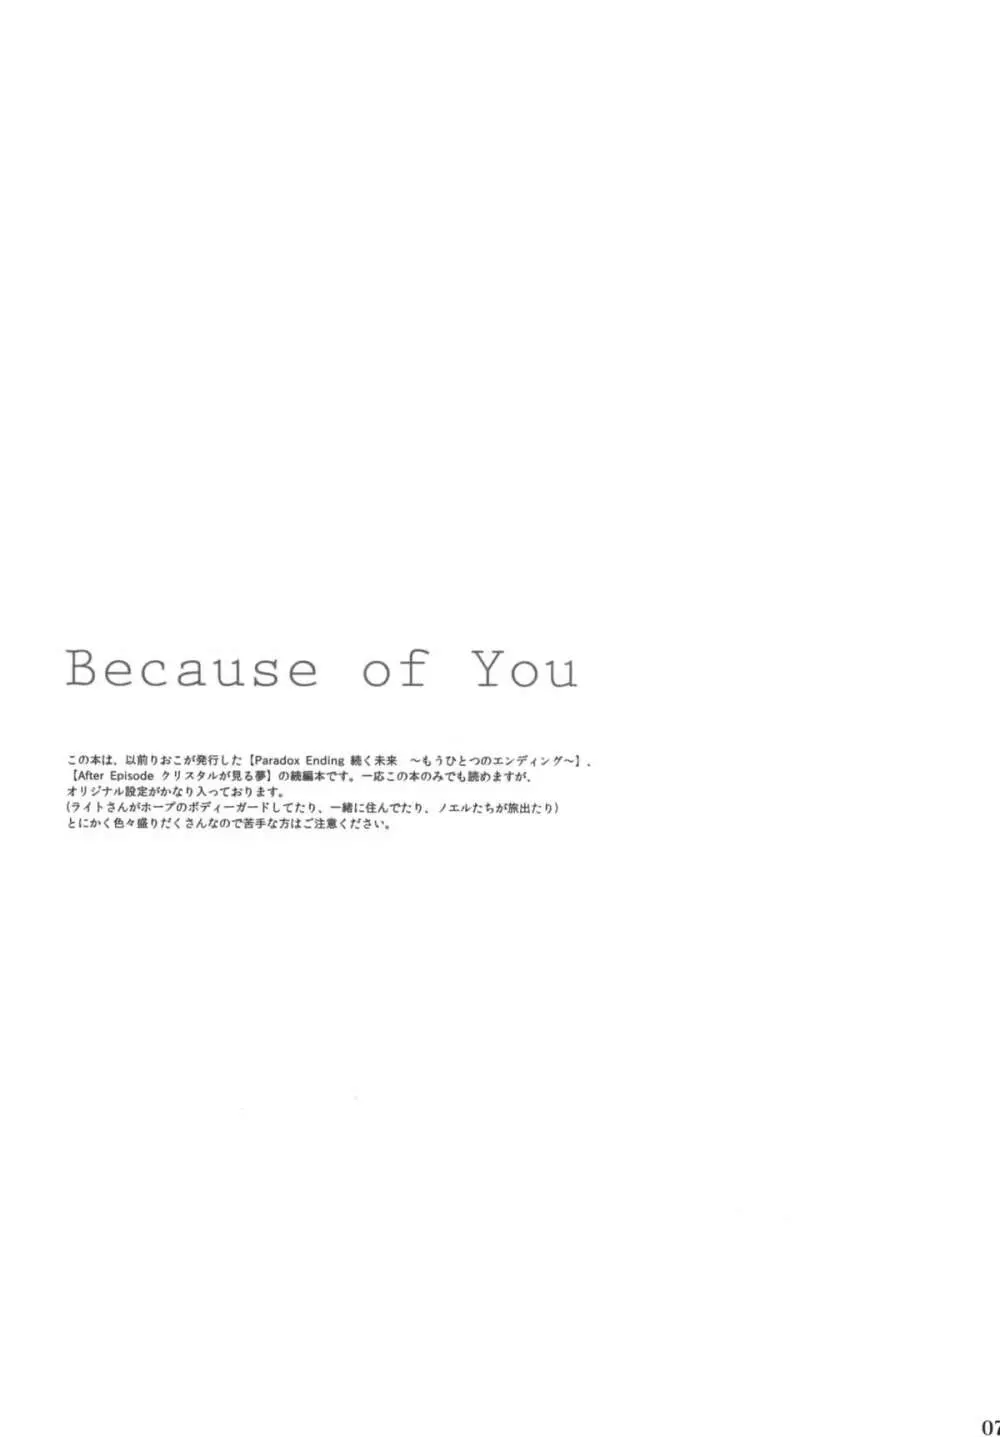 Because of You 7ページ